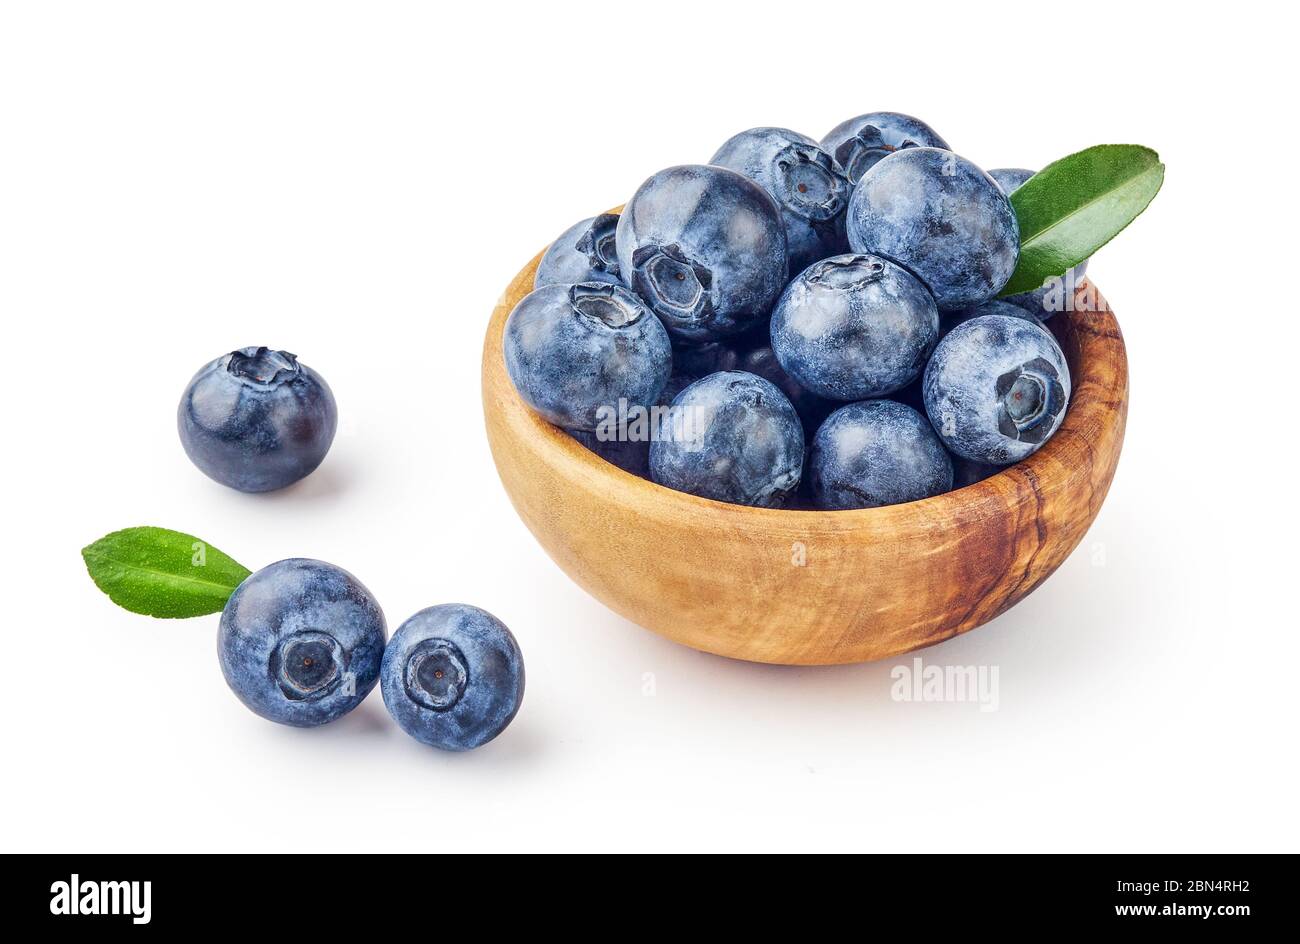 Fresh blueberries with blueberry leaves in wooden bowl isolated on white background. Stock Photo